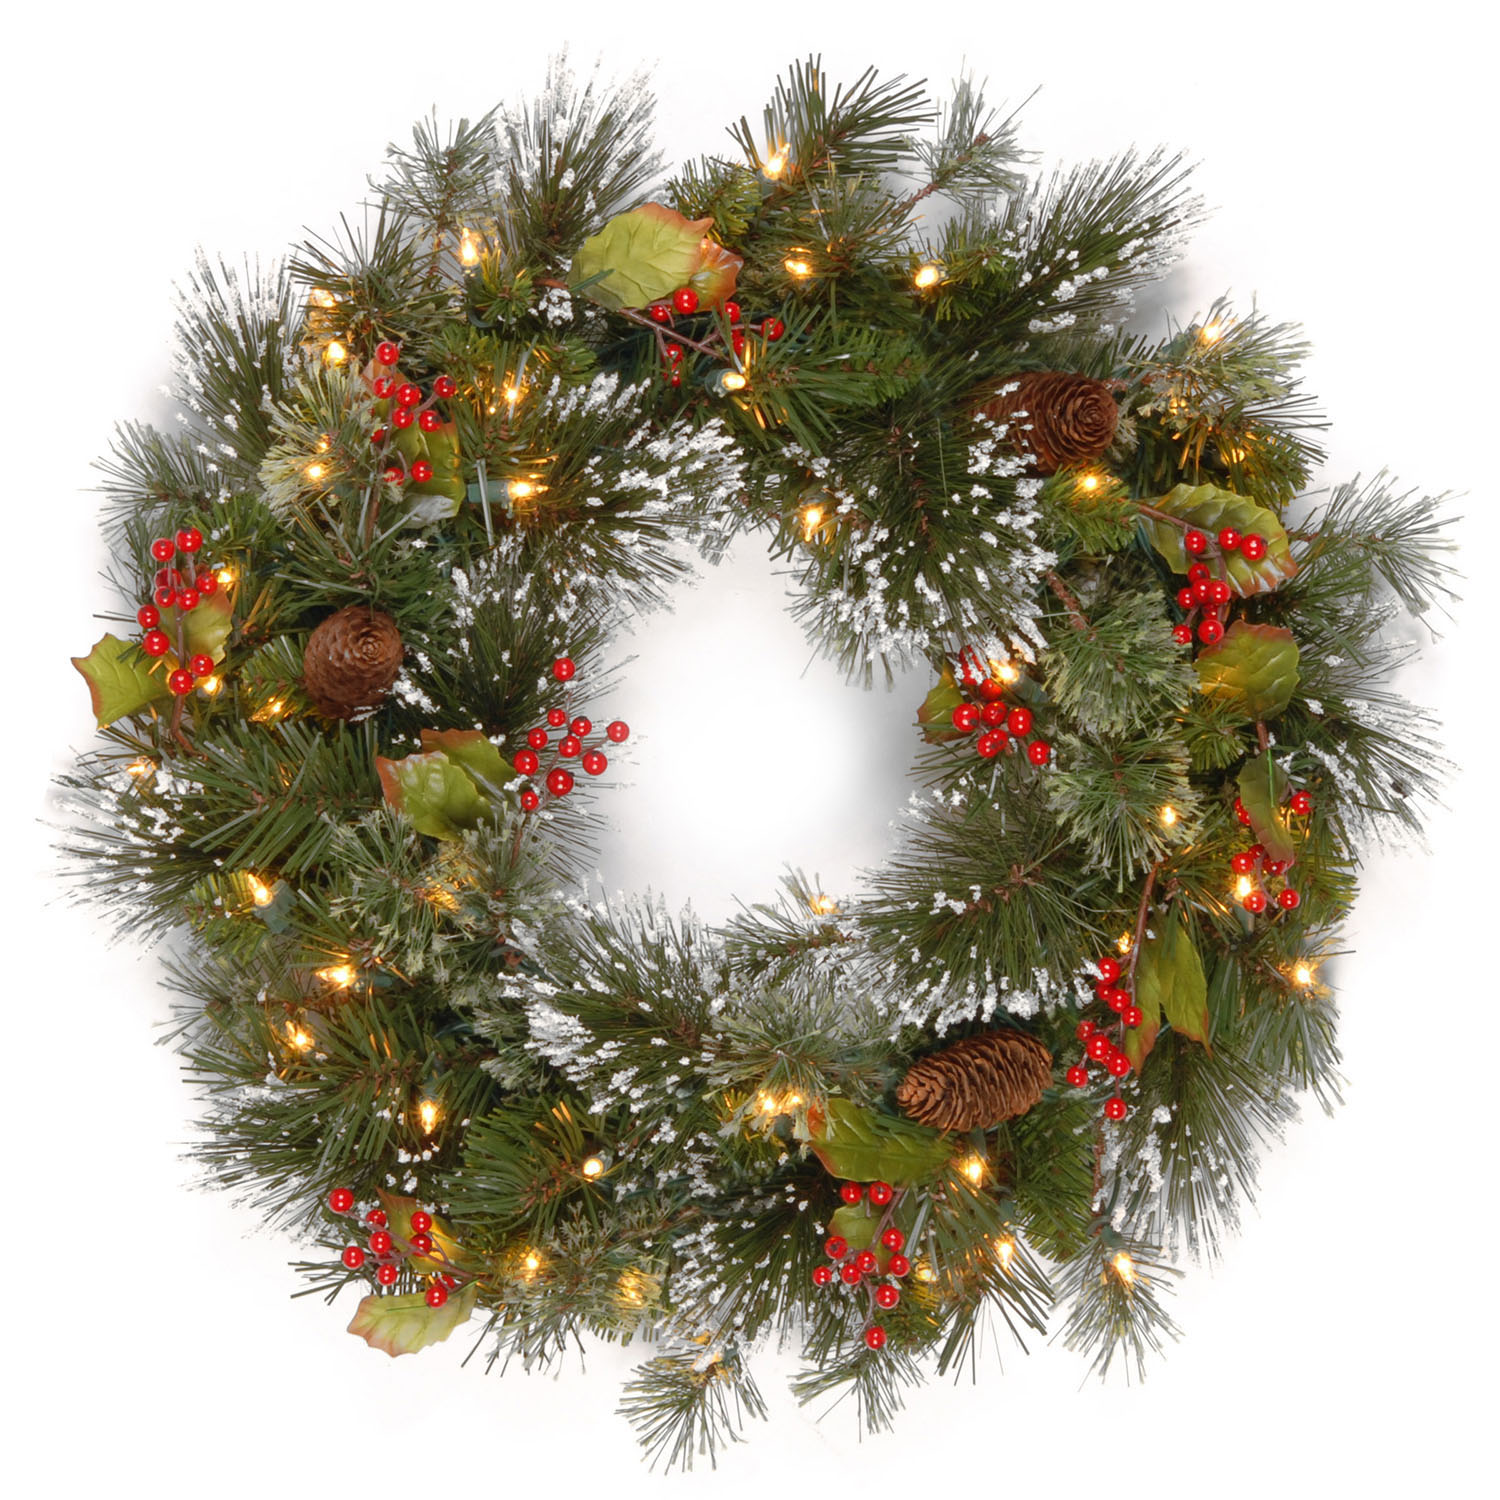 24 Inch Wintry Pine Wreath: Clear Lights